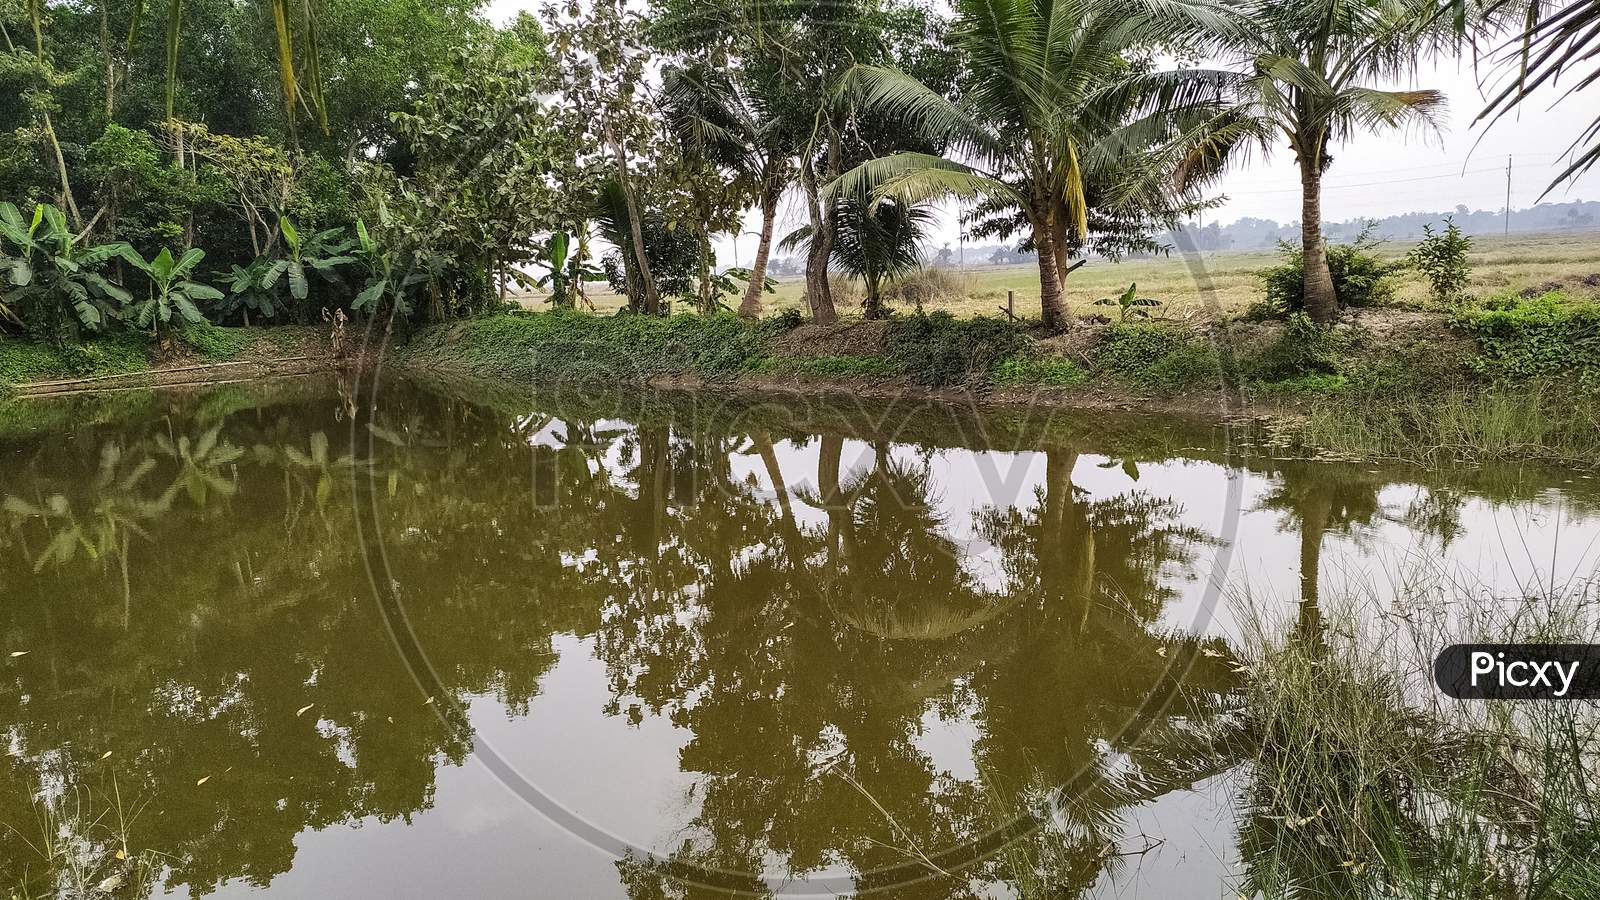 Pond surrounded by coconut trees